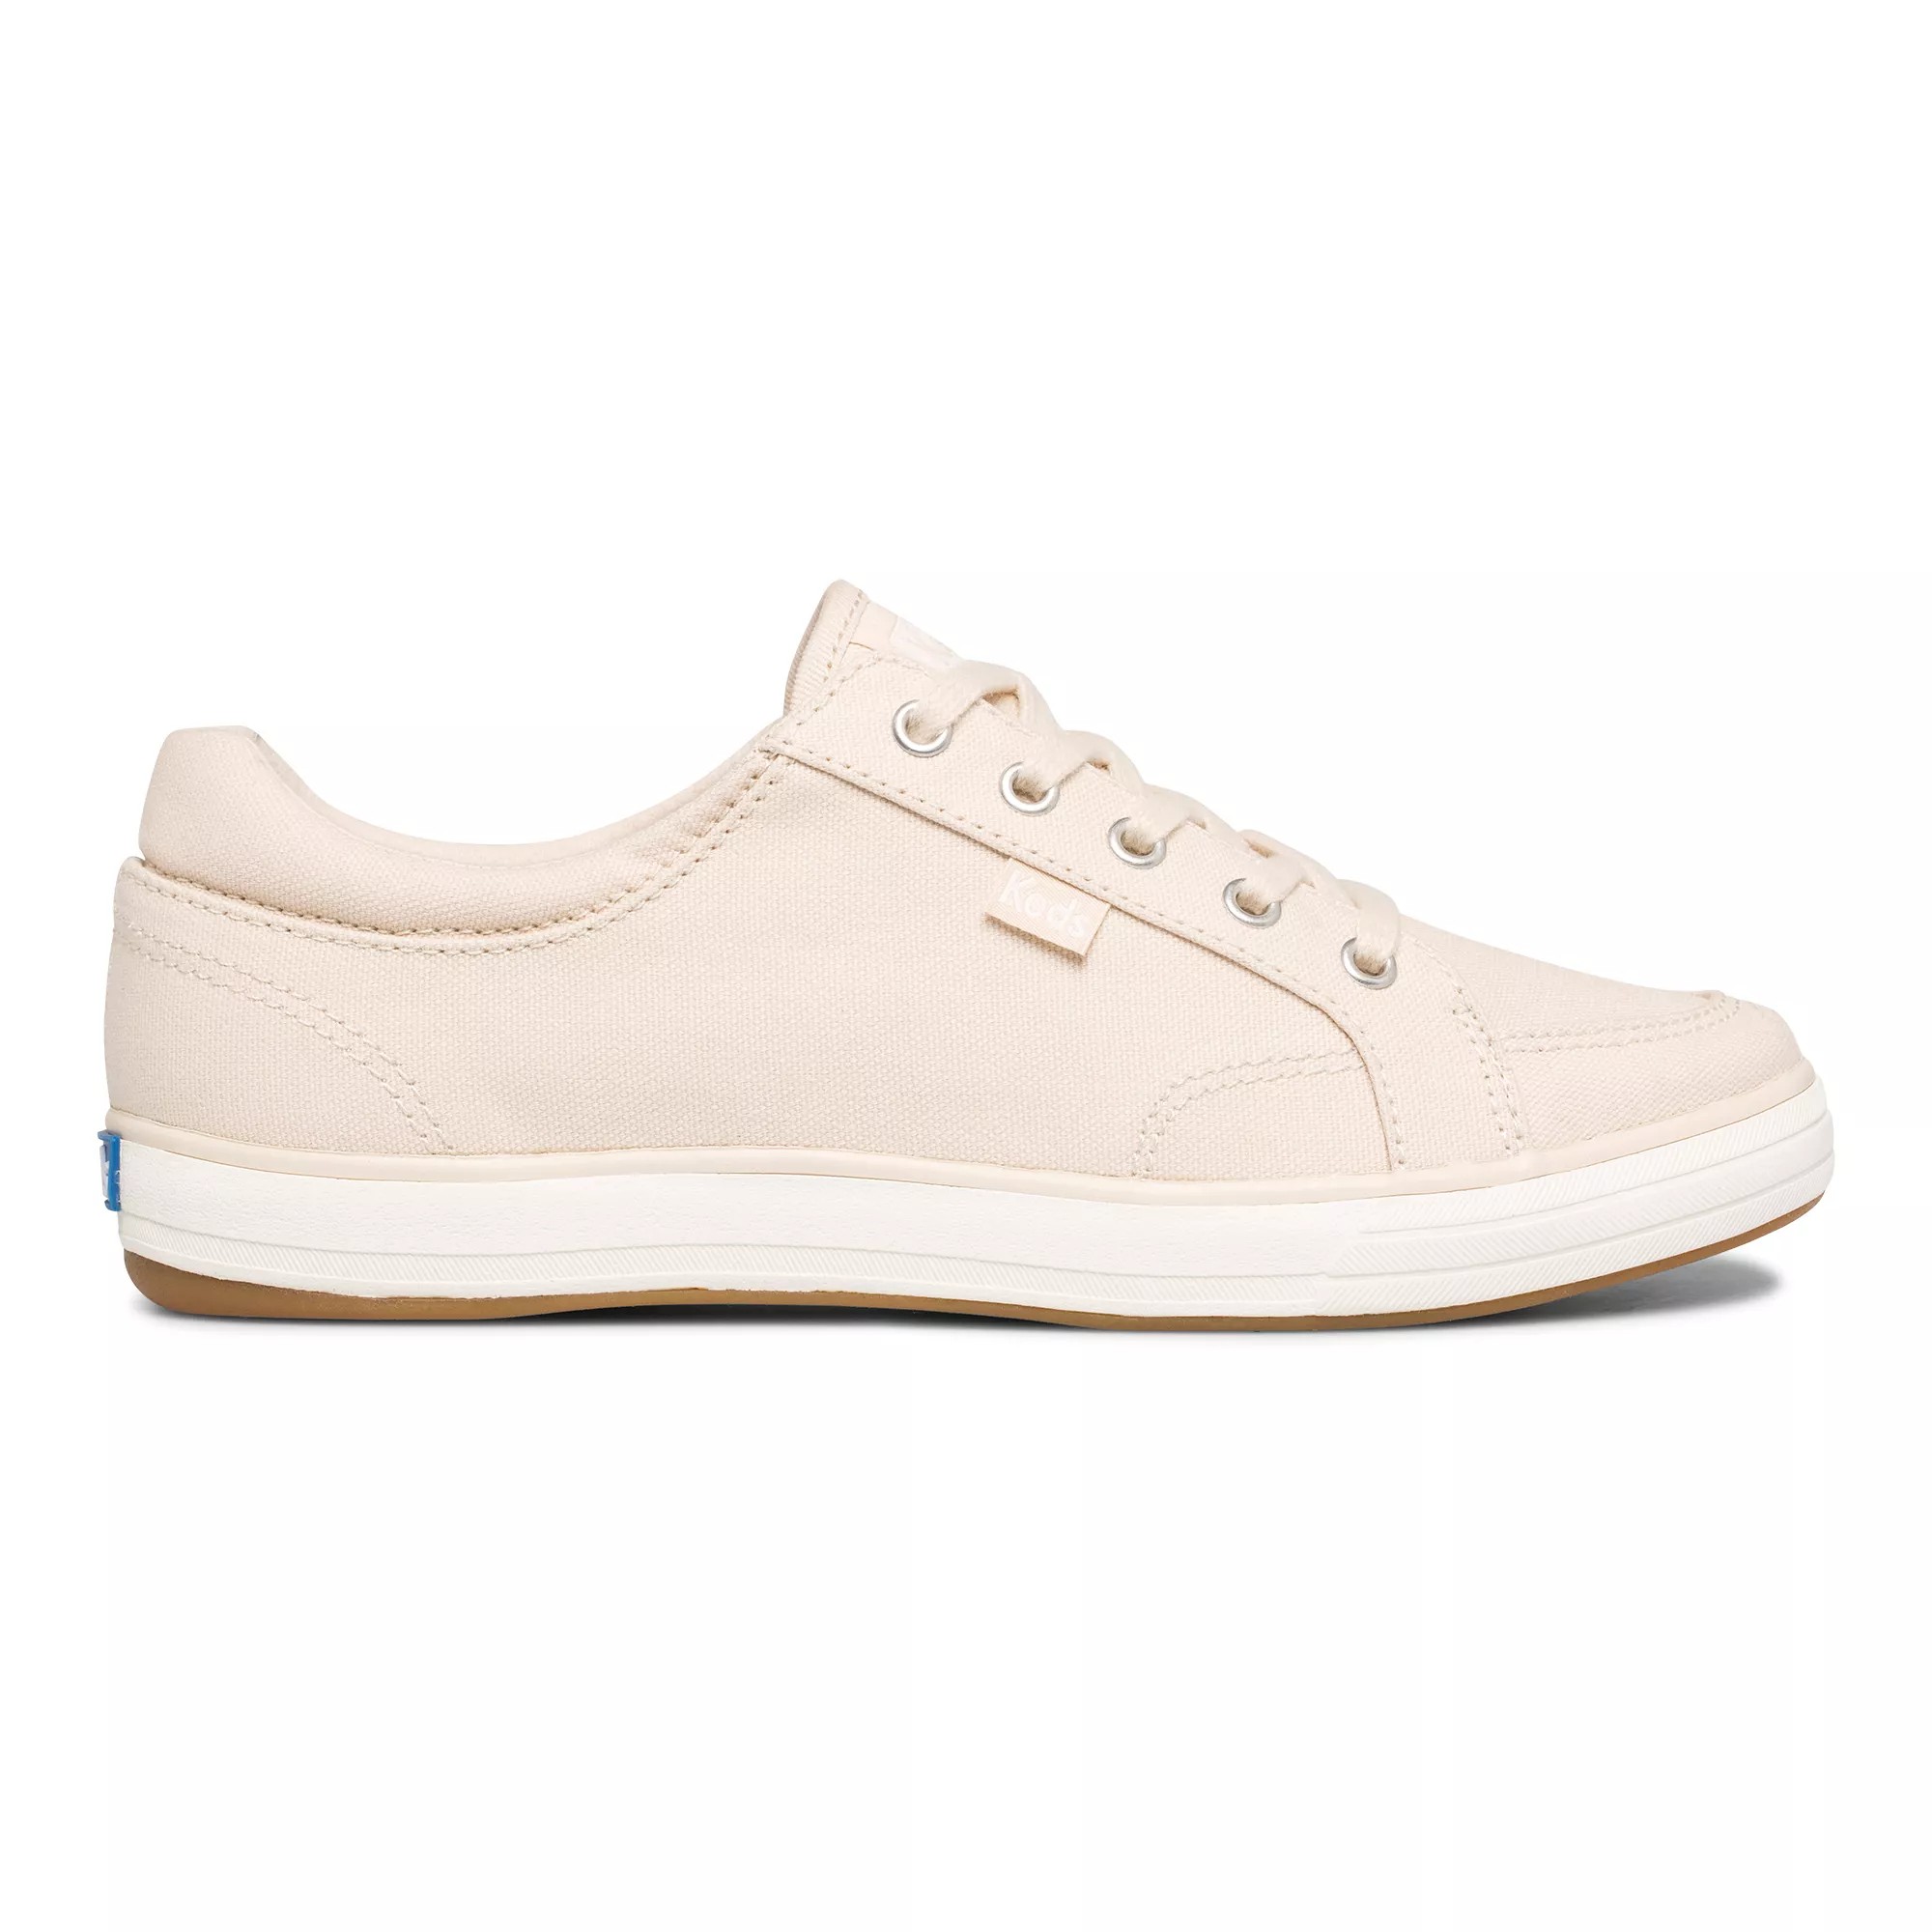 Keds Center II Canvas Lace Up - Free Shipping | KEDS